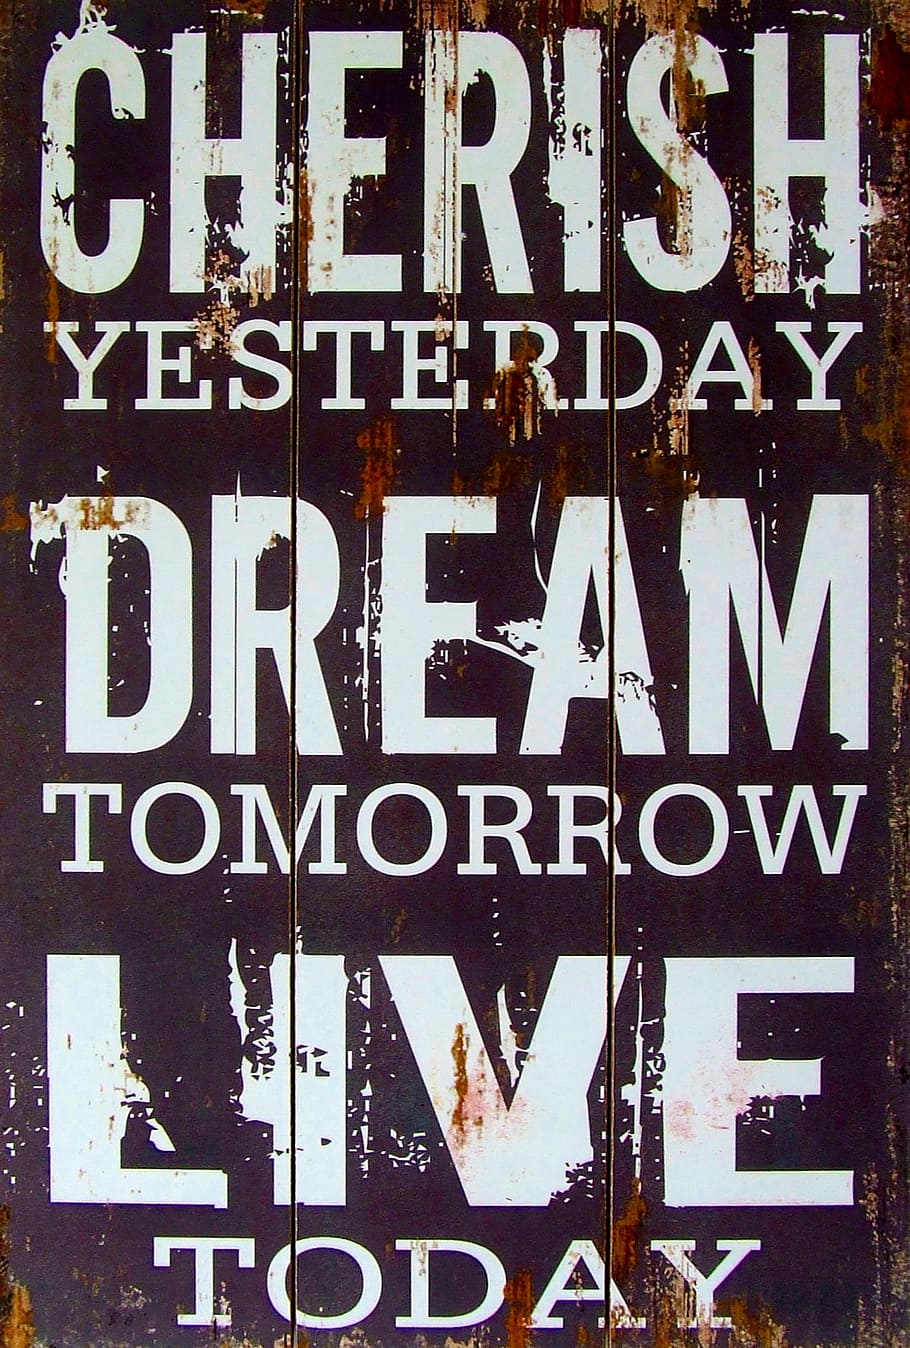 yesterday dream tomorrow, live, today signage, Cherish, yesterday, dream, tomorrow, today, signage, old